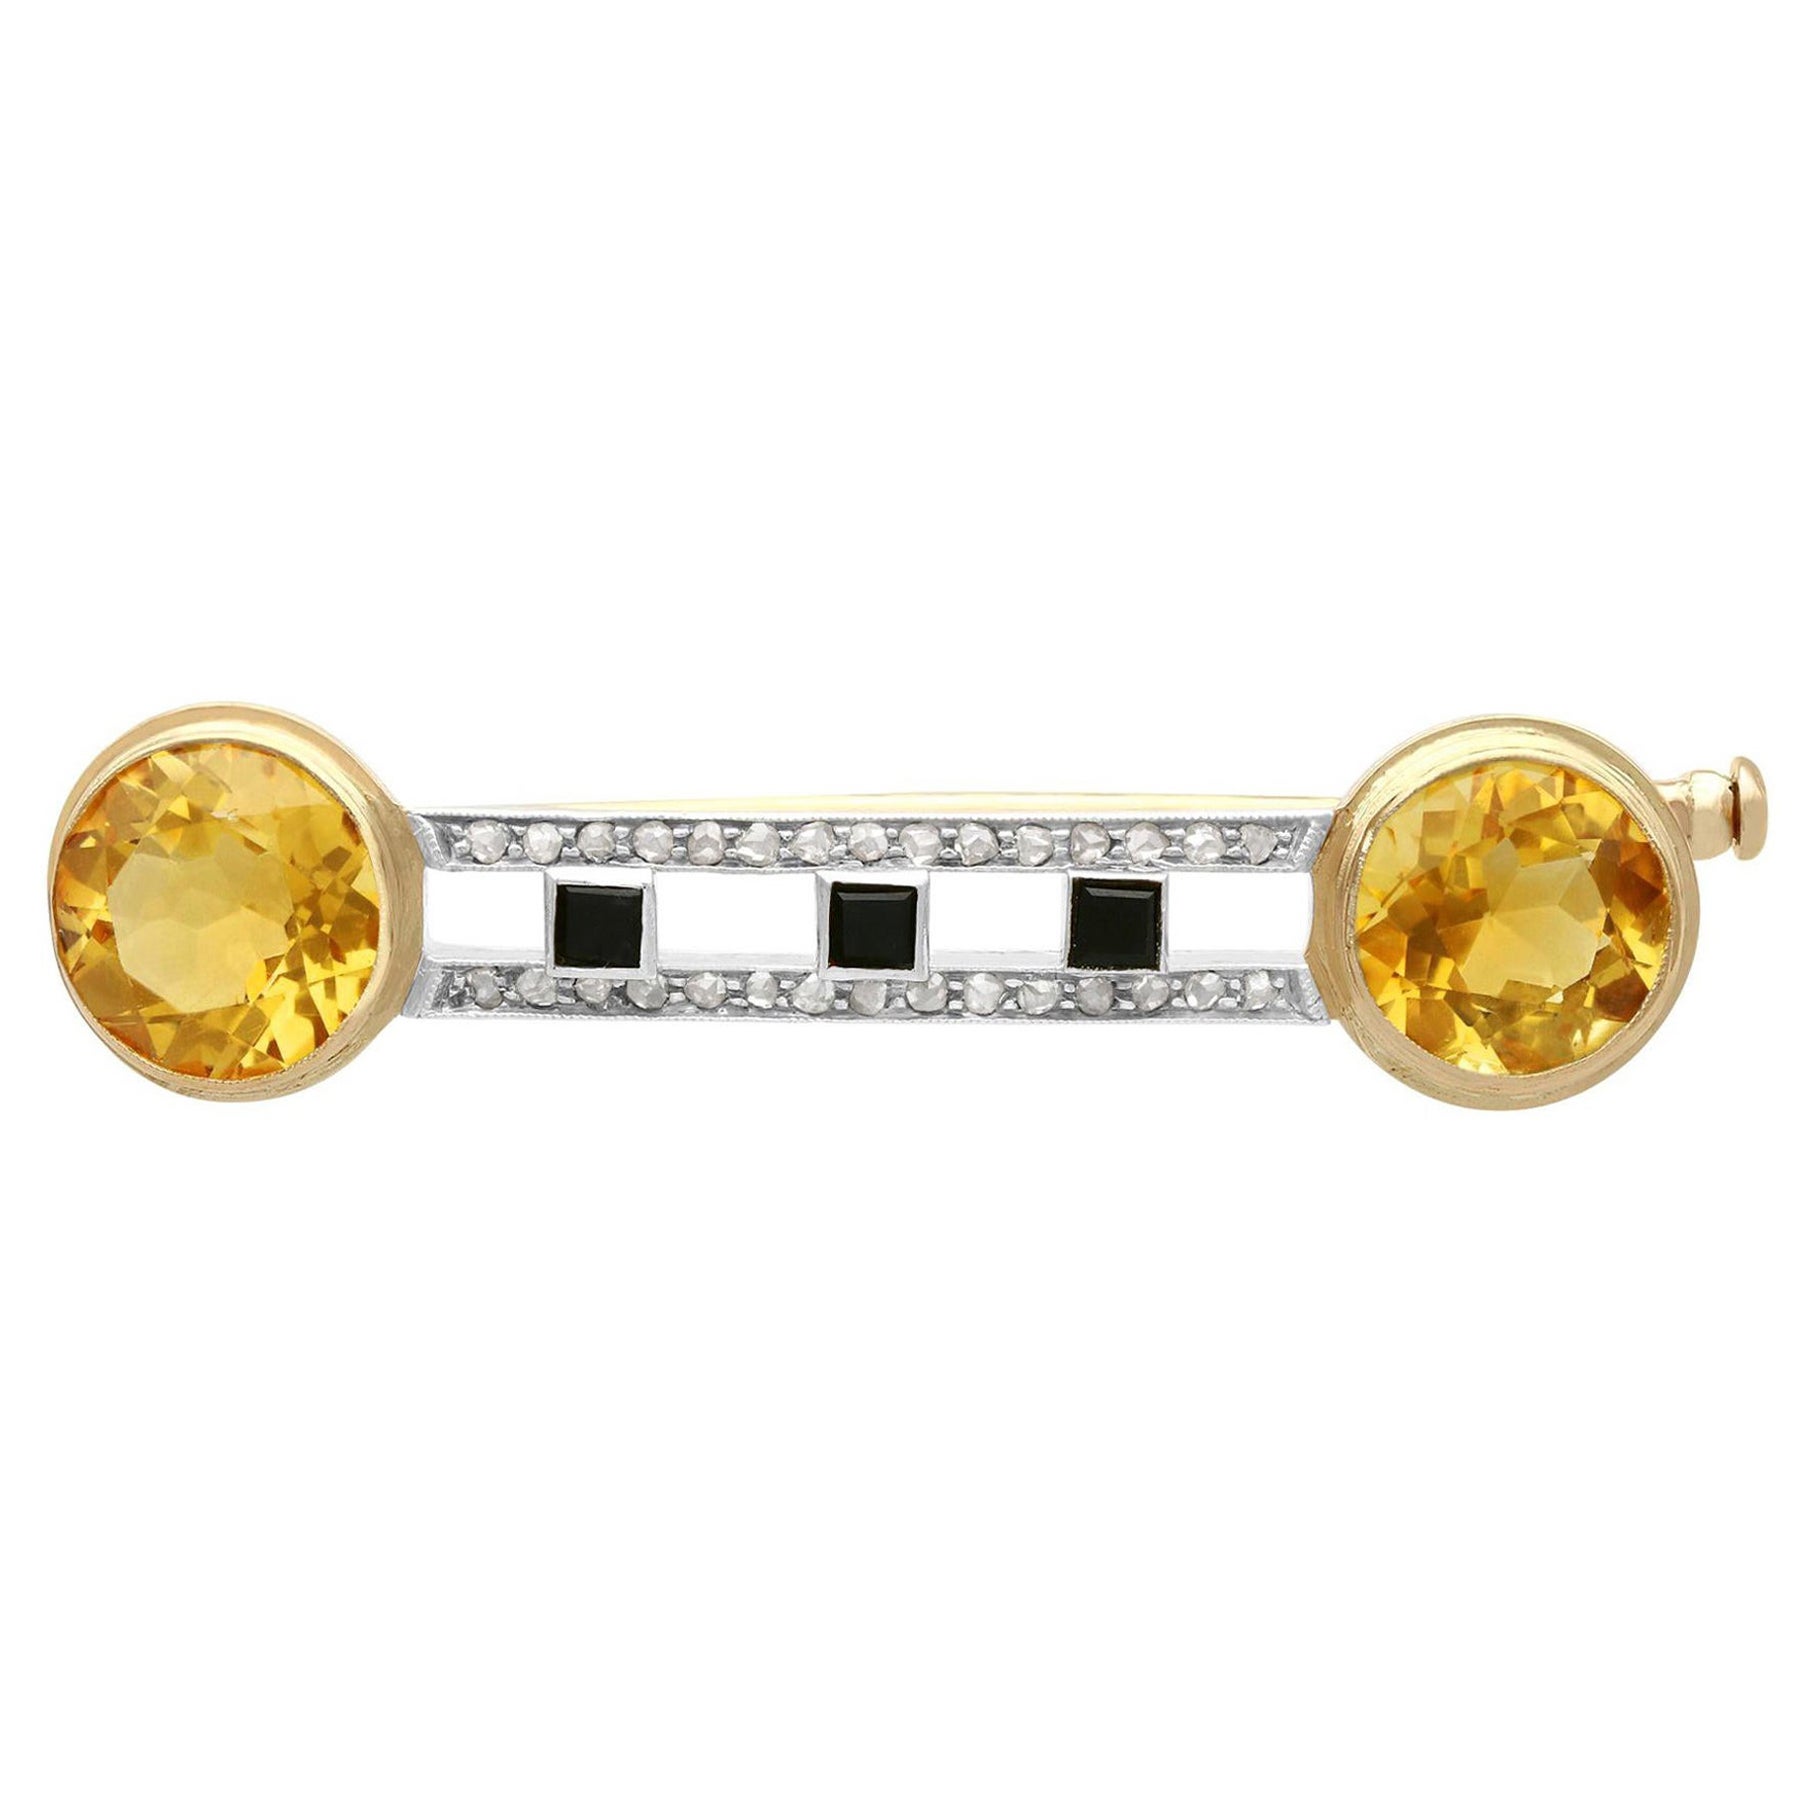 1920s 6.69 Carat Citrine Diamond and Onyx Yellow Gold Brooch For Sale